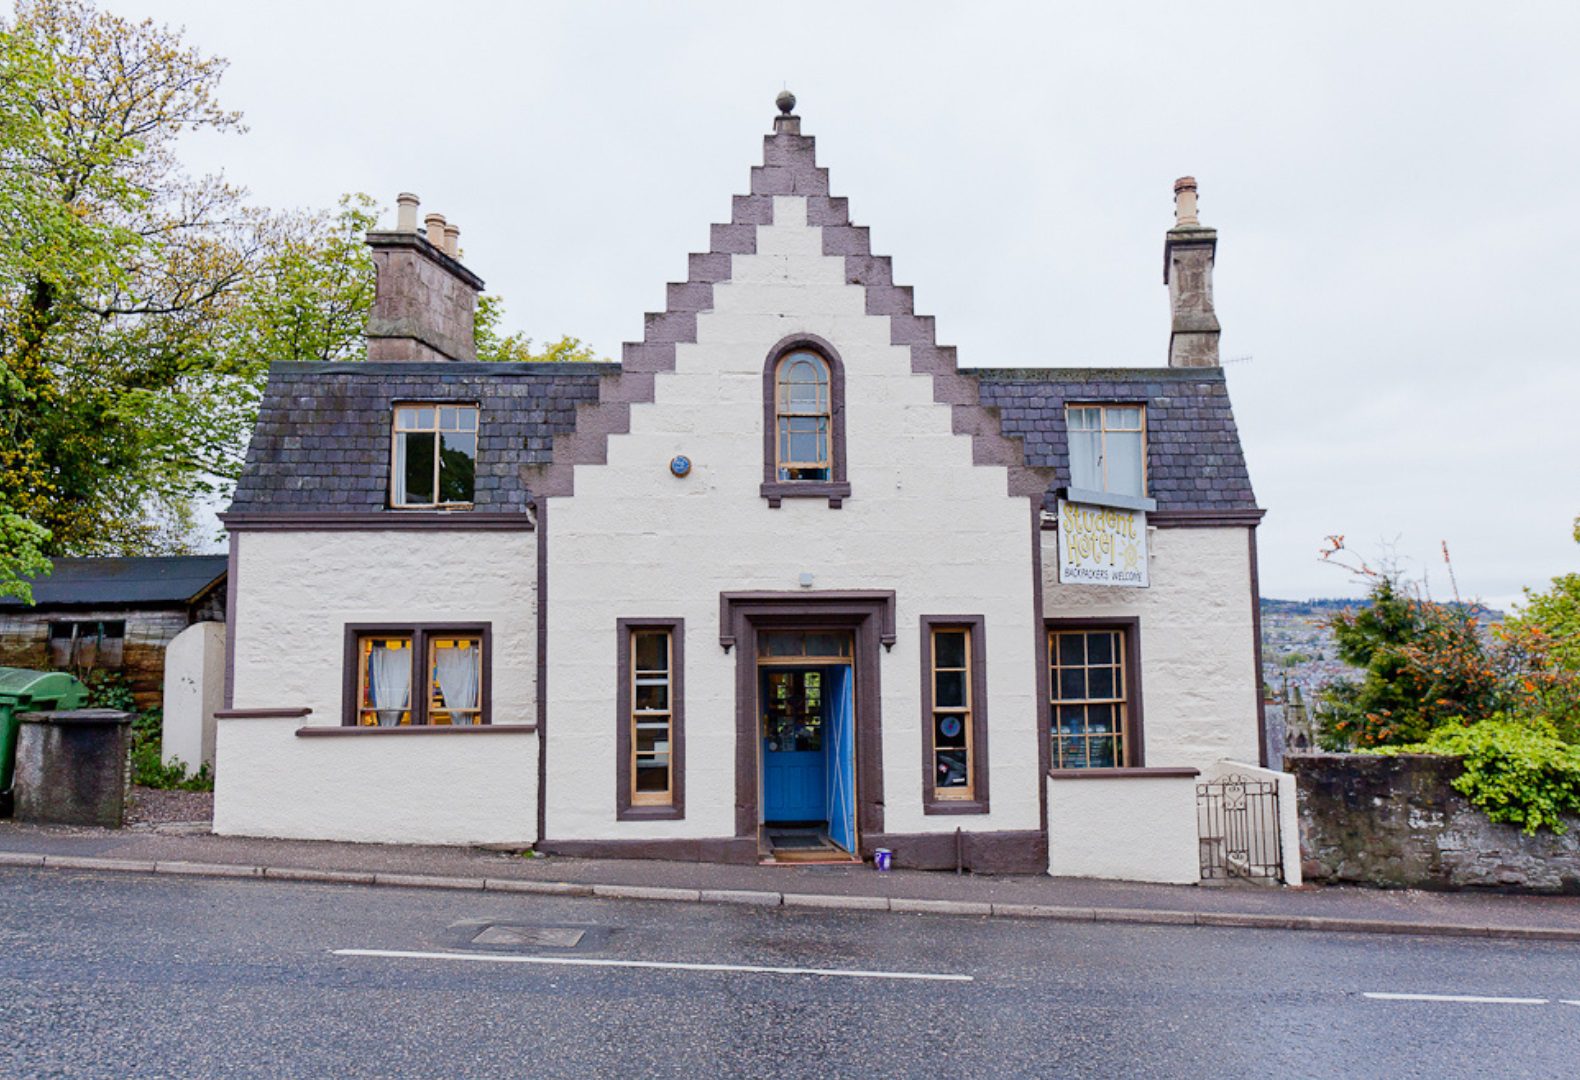 Inverness Student Hotel